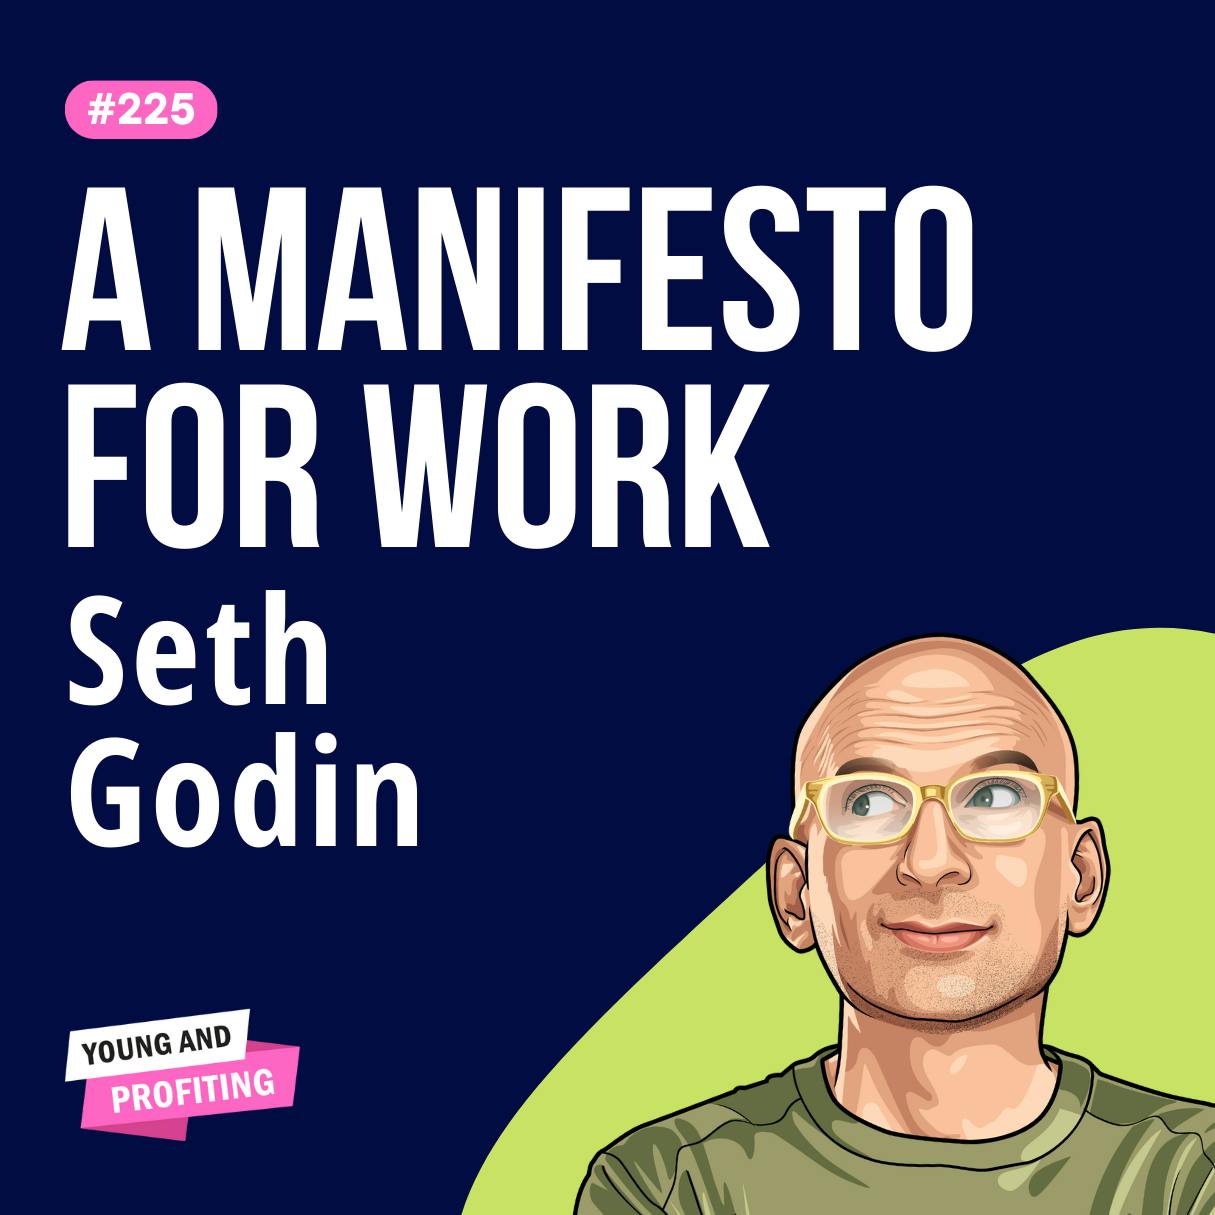 Seth Godin: Why Employee Productivity Is at a 70-Year Low and What to Do About It | E225